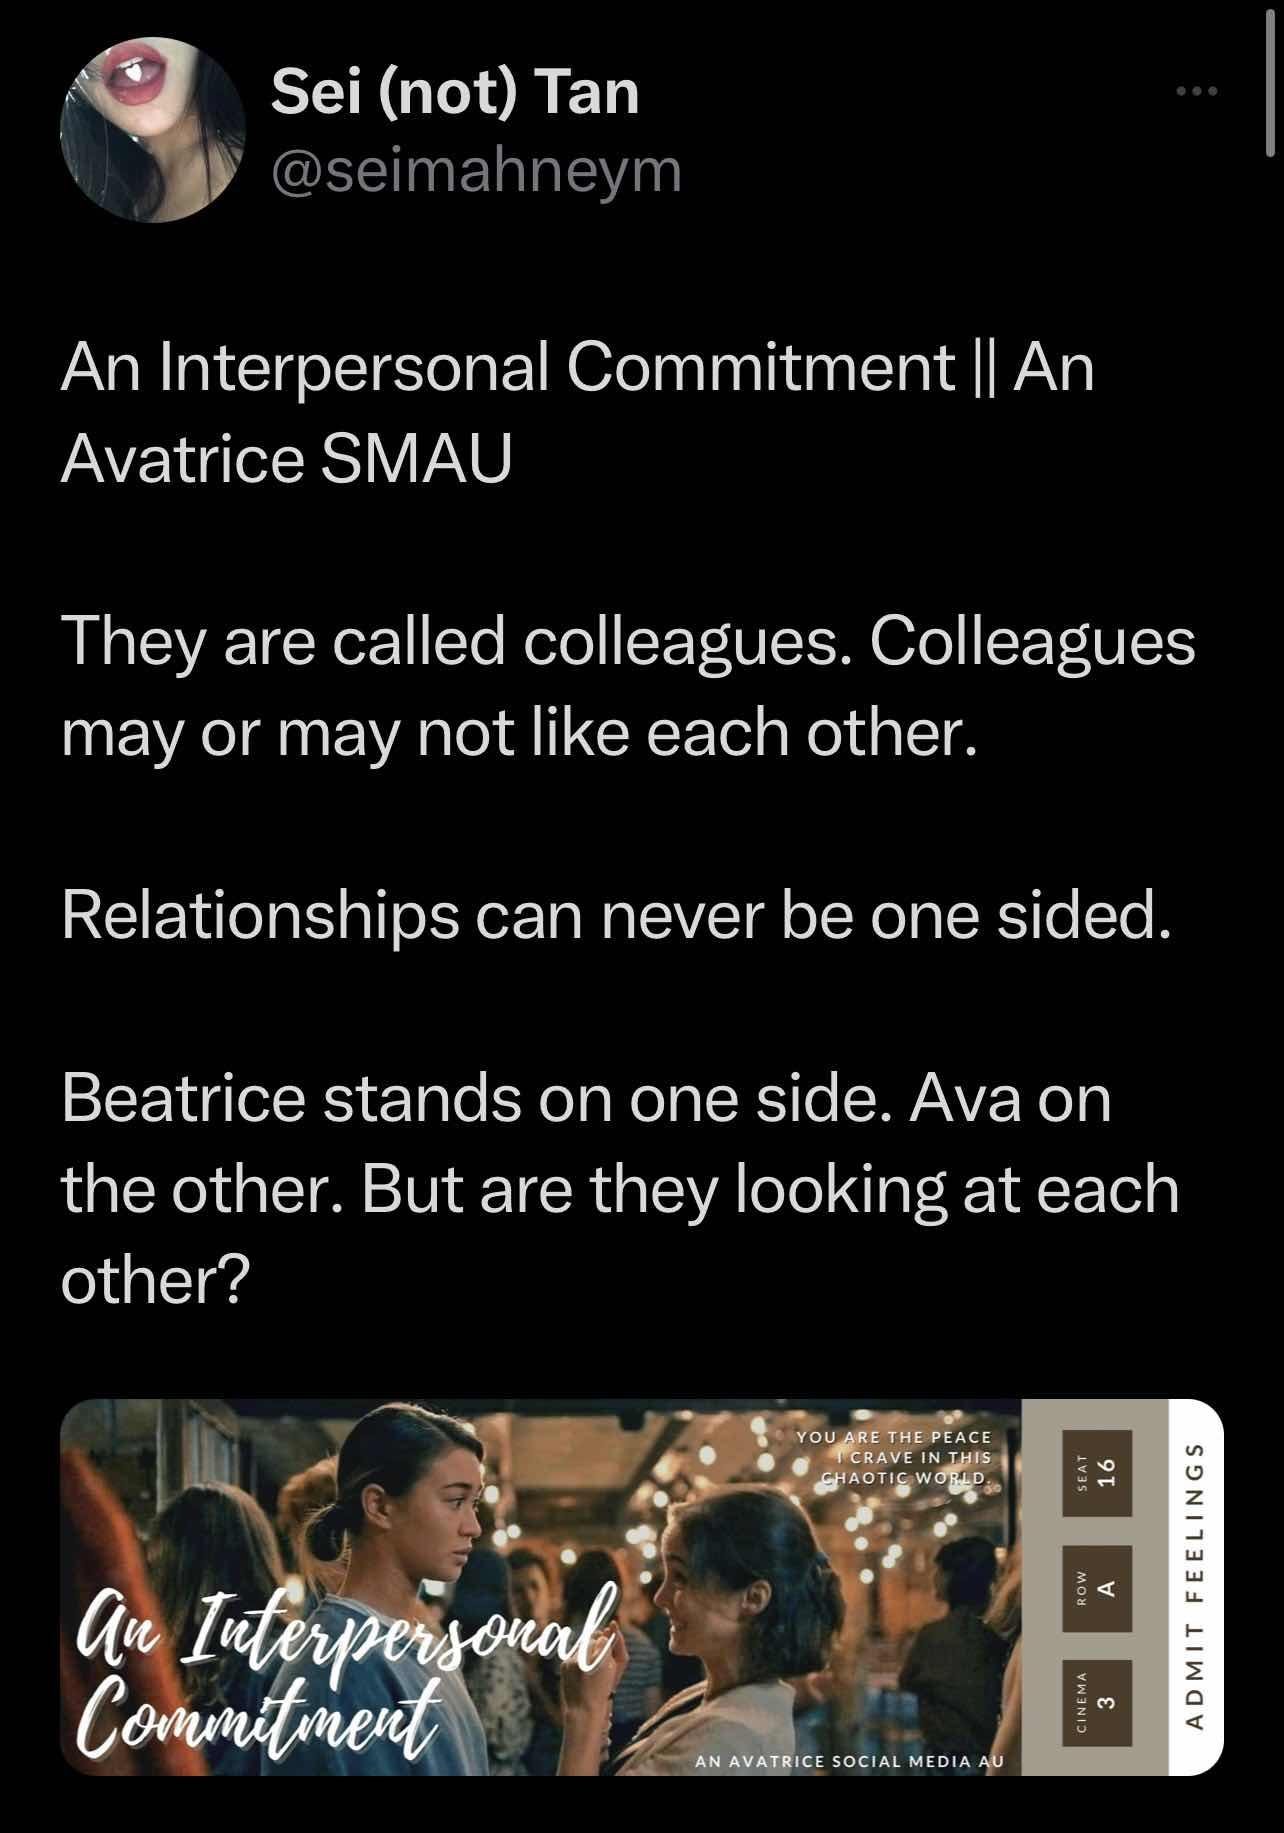  An Interpersonal Commitment || An Avatrice SMAU 